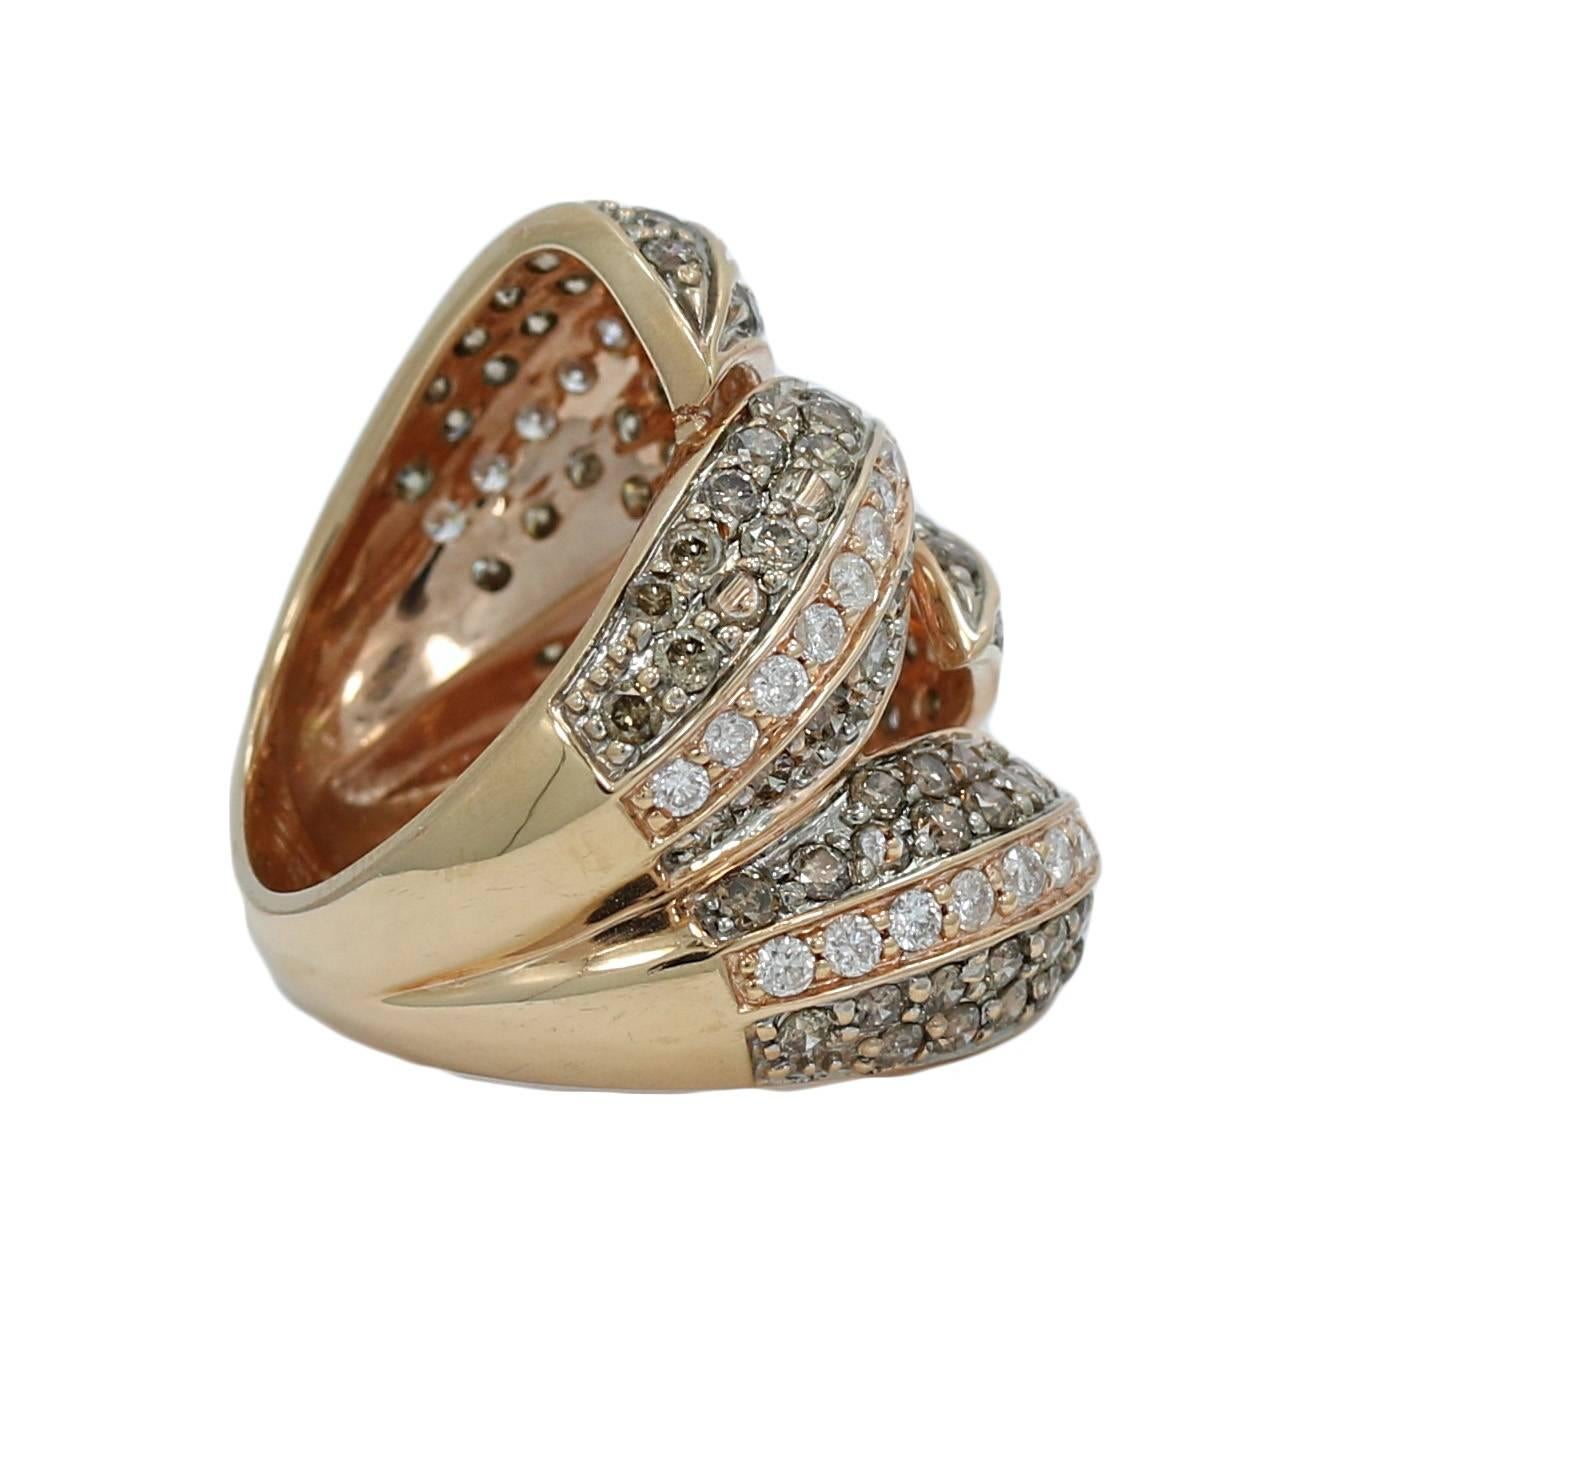 We have this 18k rose gold and brown diamond fashion ring. It has one hundred twenty 120 diamonds weighing approximately 2.50 carats total weight. The ring sits at a size 5 and can be adjusted. It weighs a total of 9.6 grams and is in great